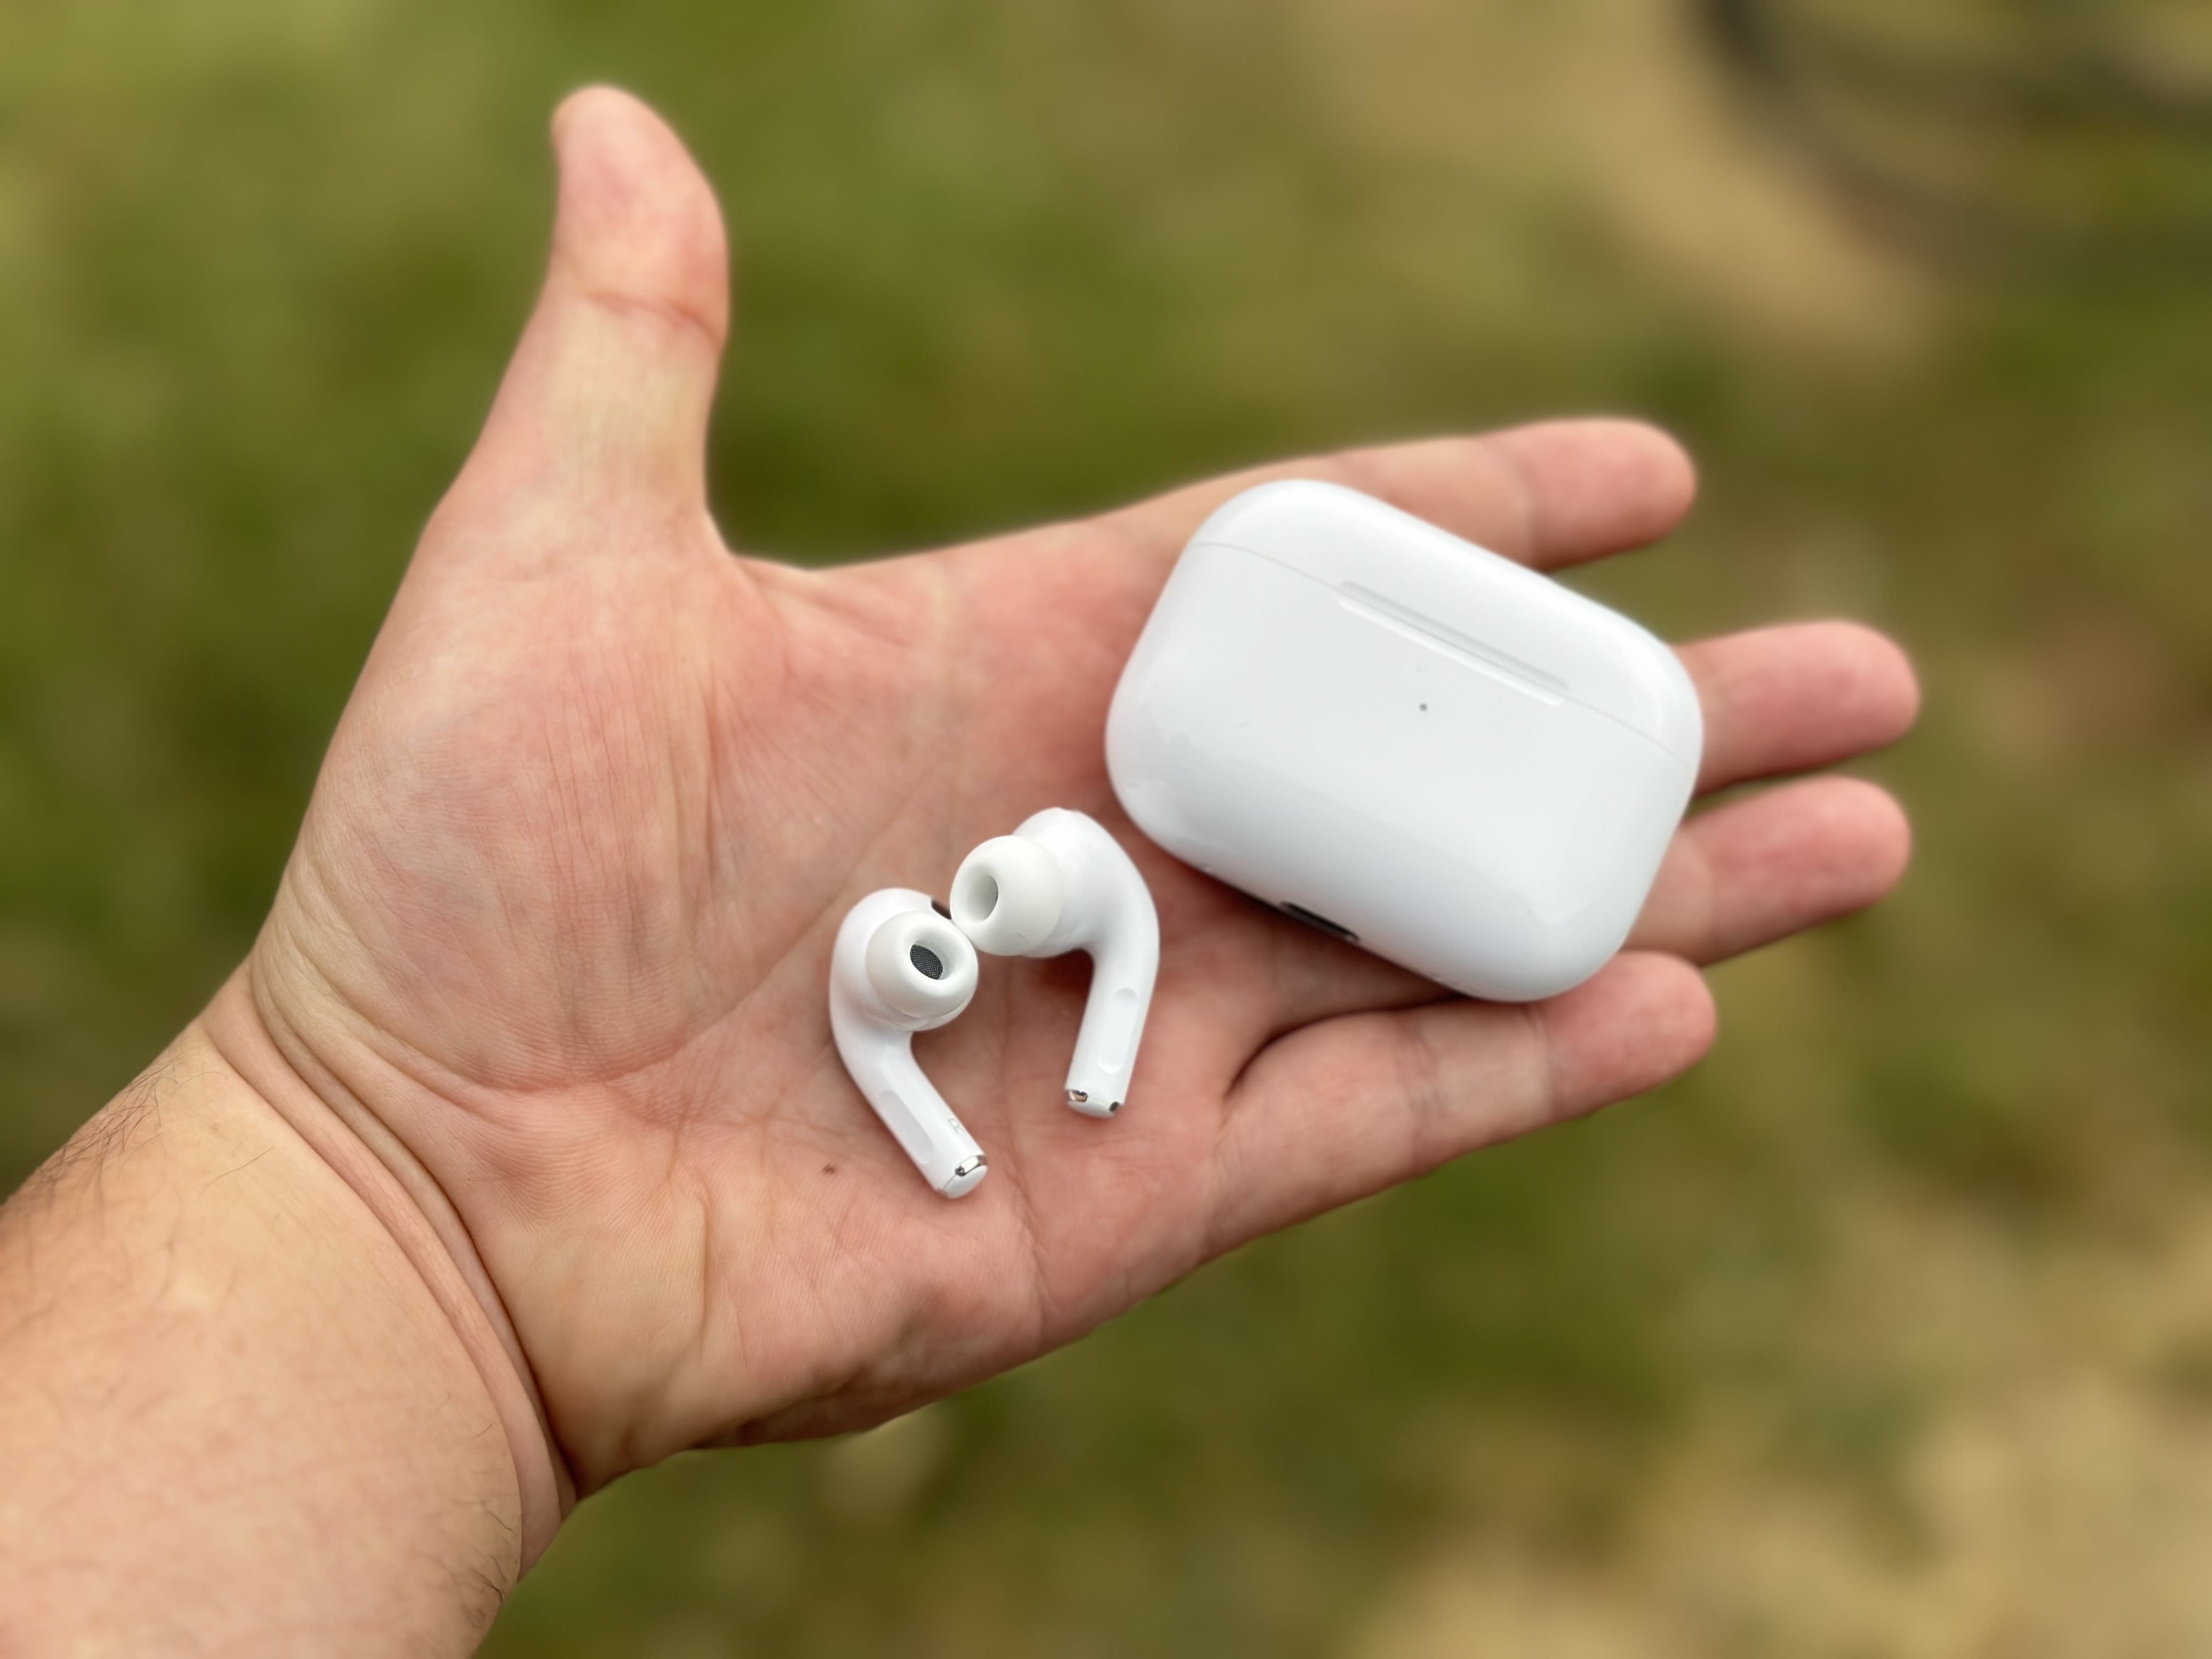 AirPods Pro USB-C hands-on: Adaptive Audio and Conversation